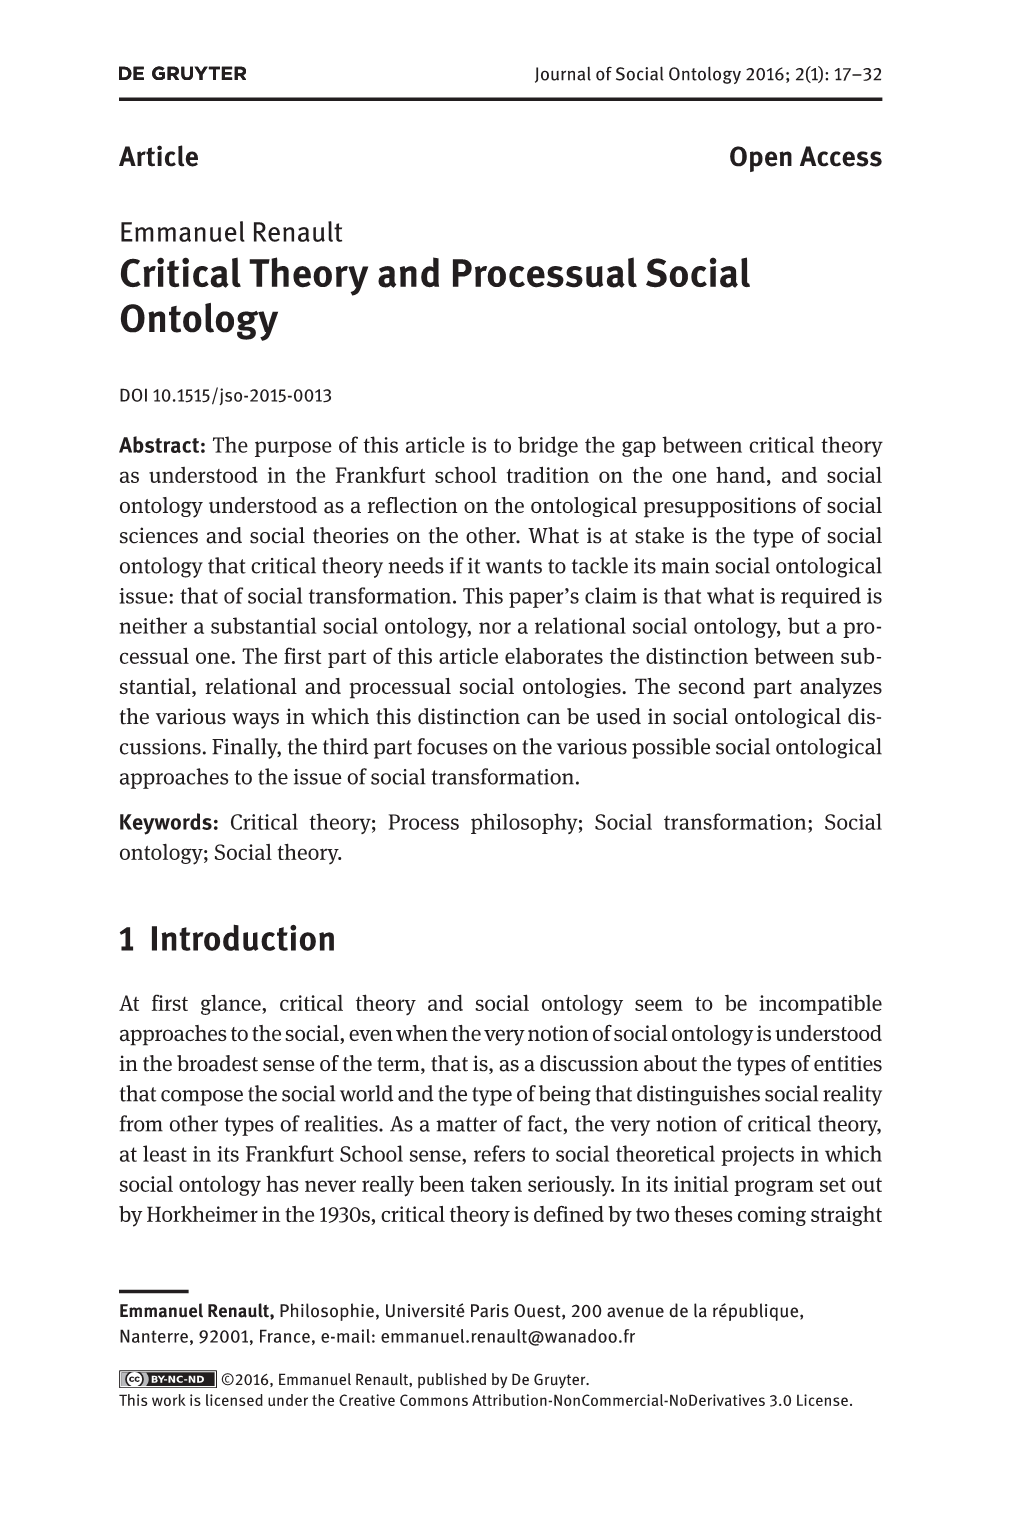 Critical Theory and Processual Social Ontology